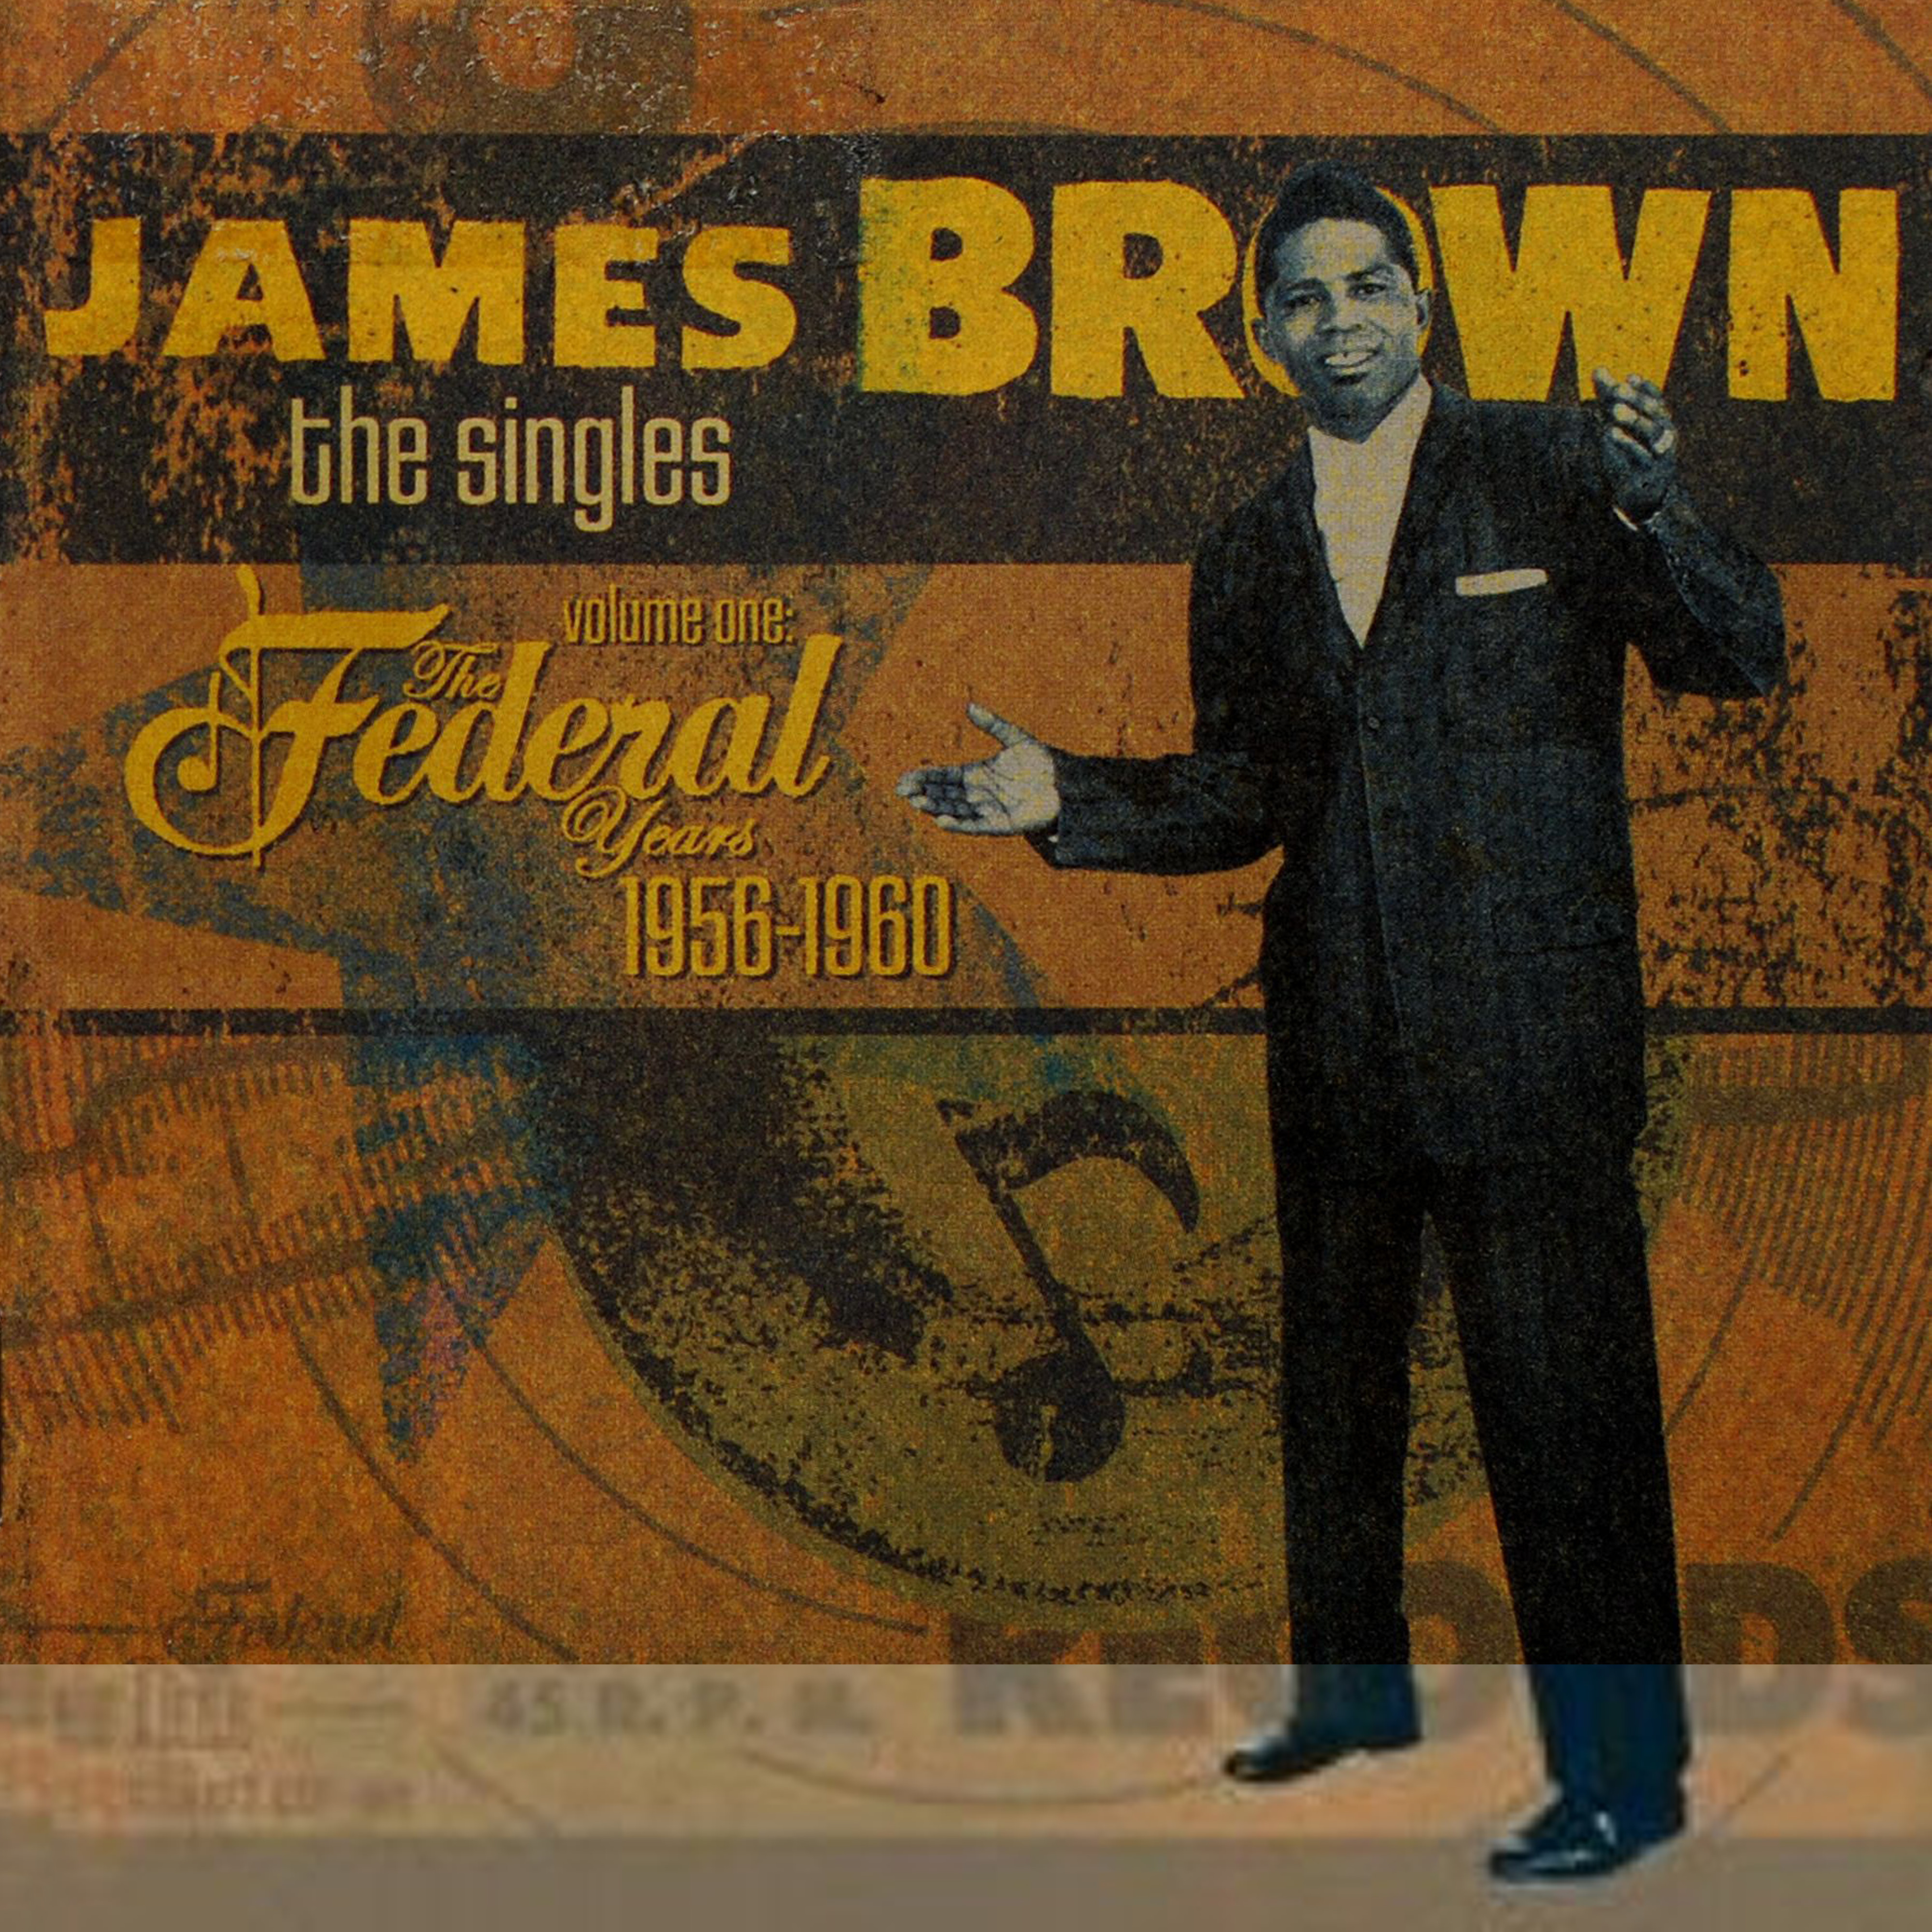 James Brown: The Singles Vol.1 The Federal Years 1956-1960